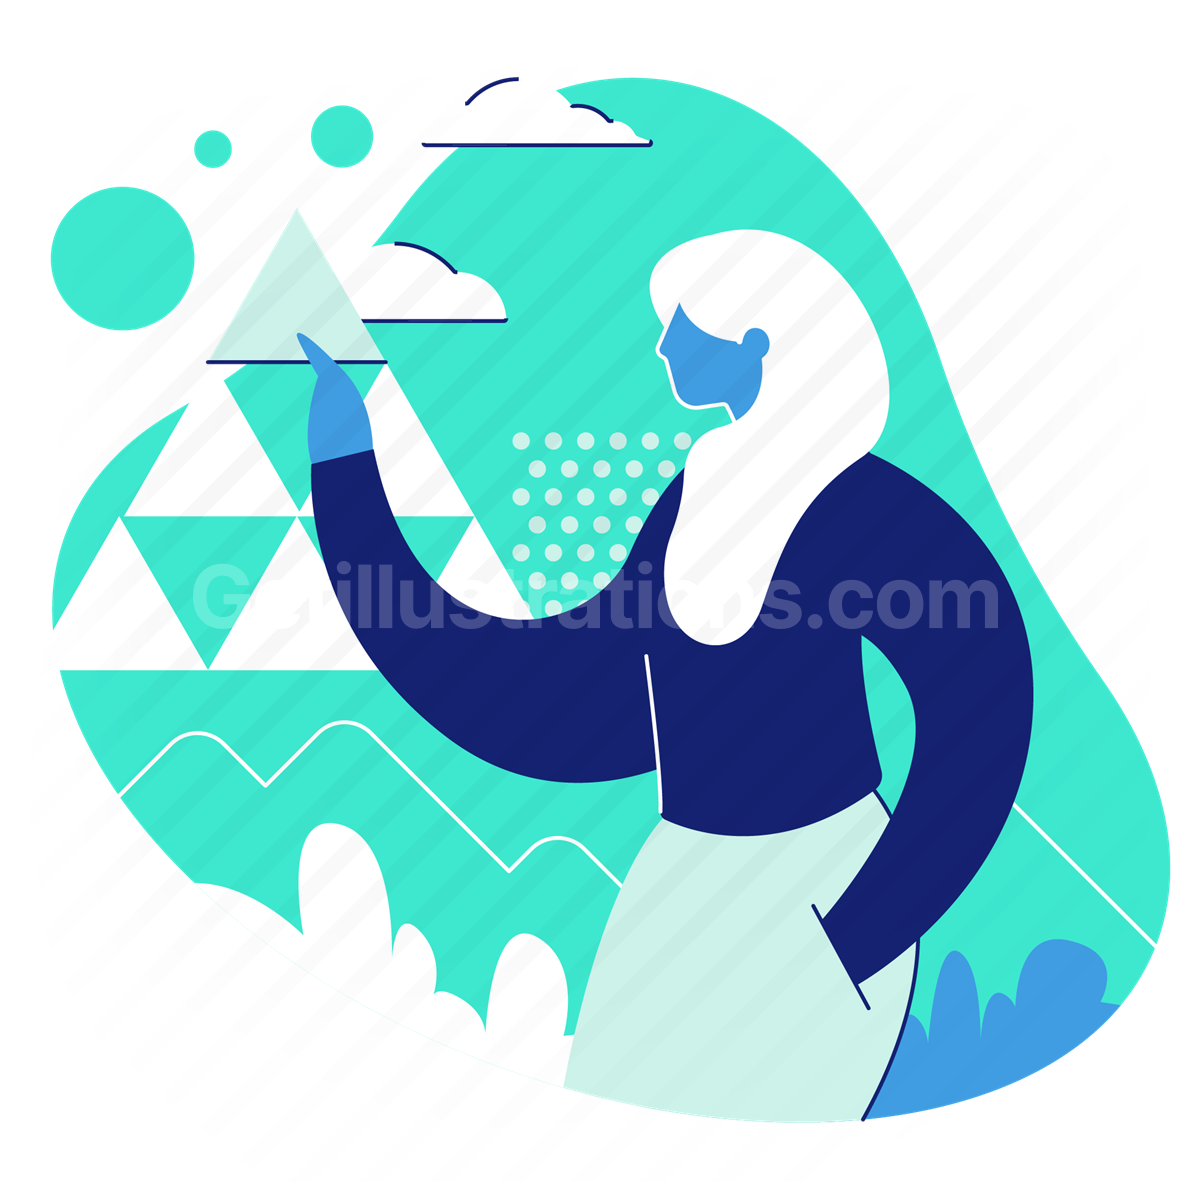 triangles, shape, shapes, woman, graph, business